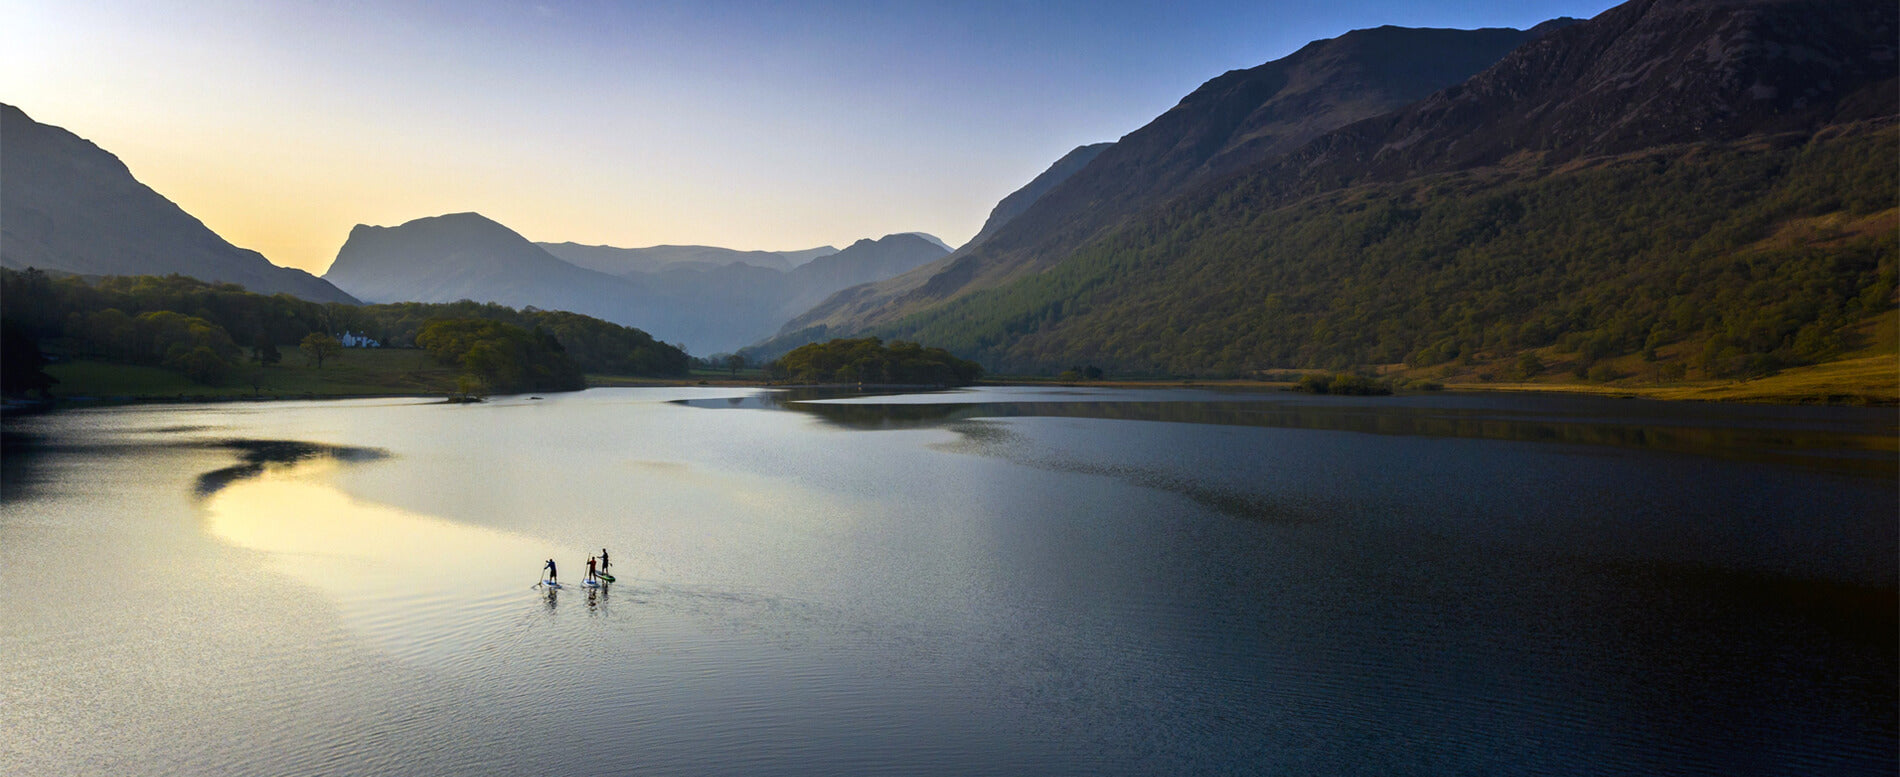 Early morning paddle boarders at Crummock water